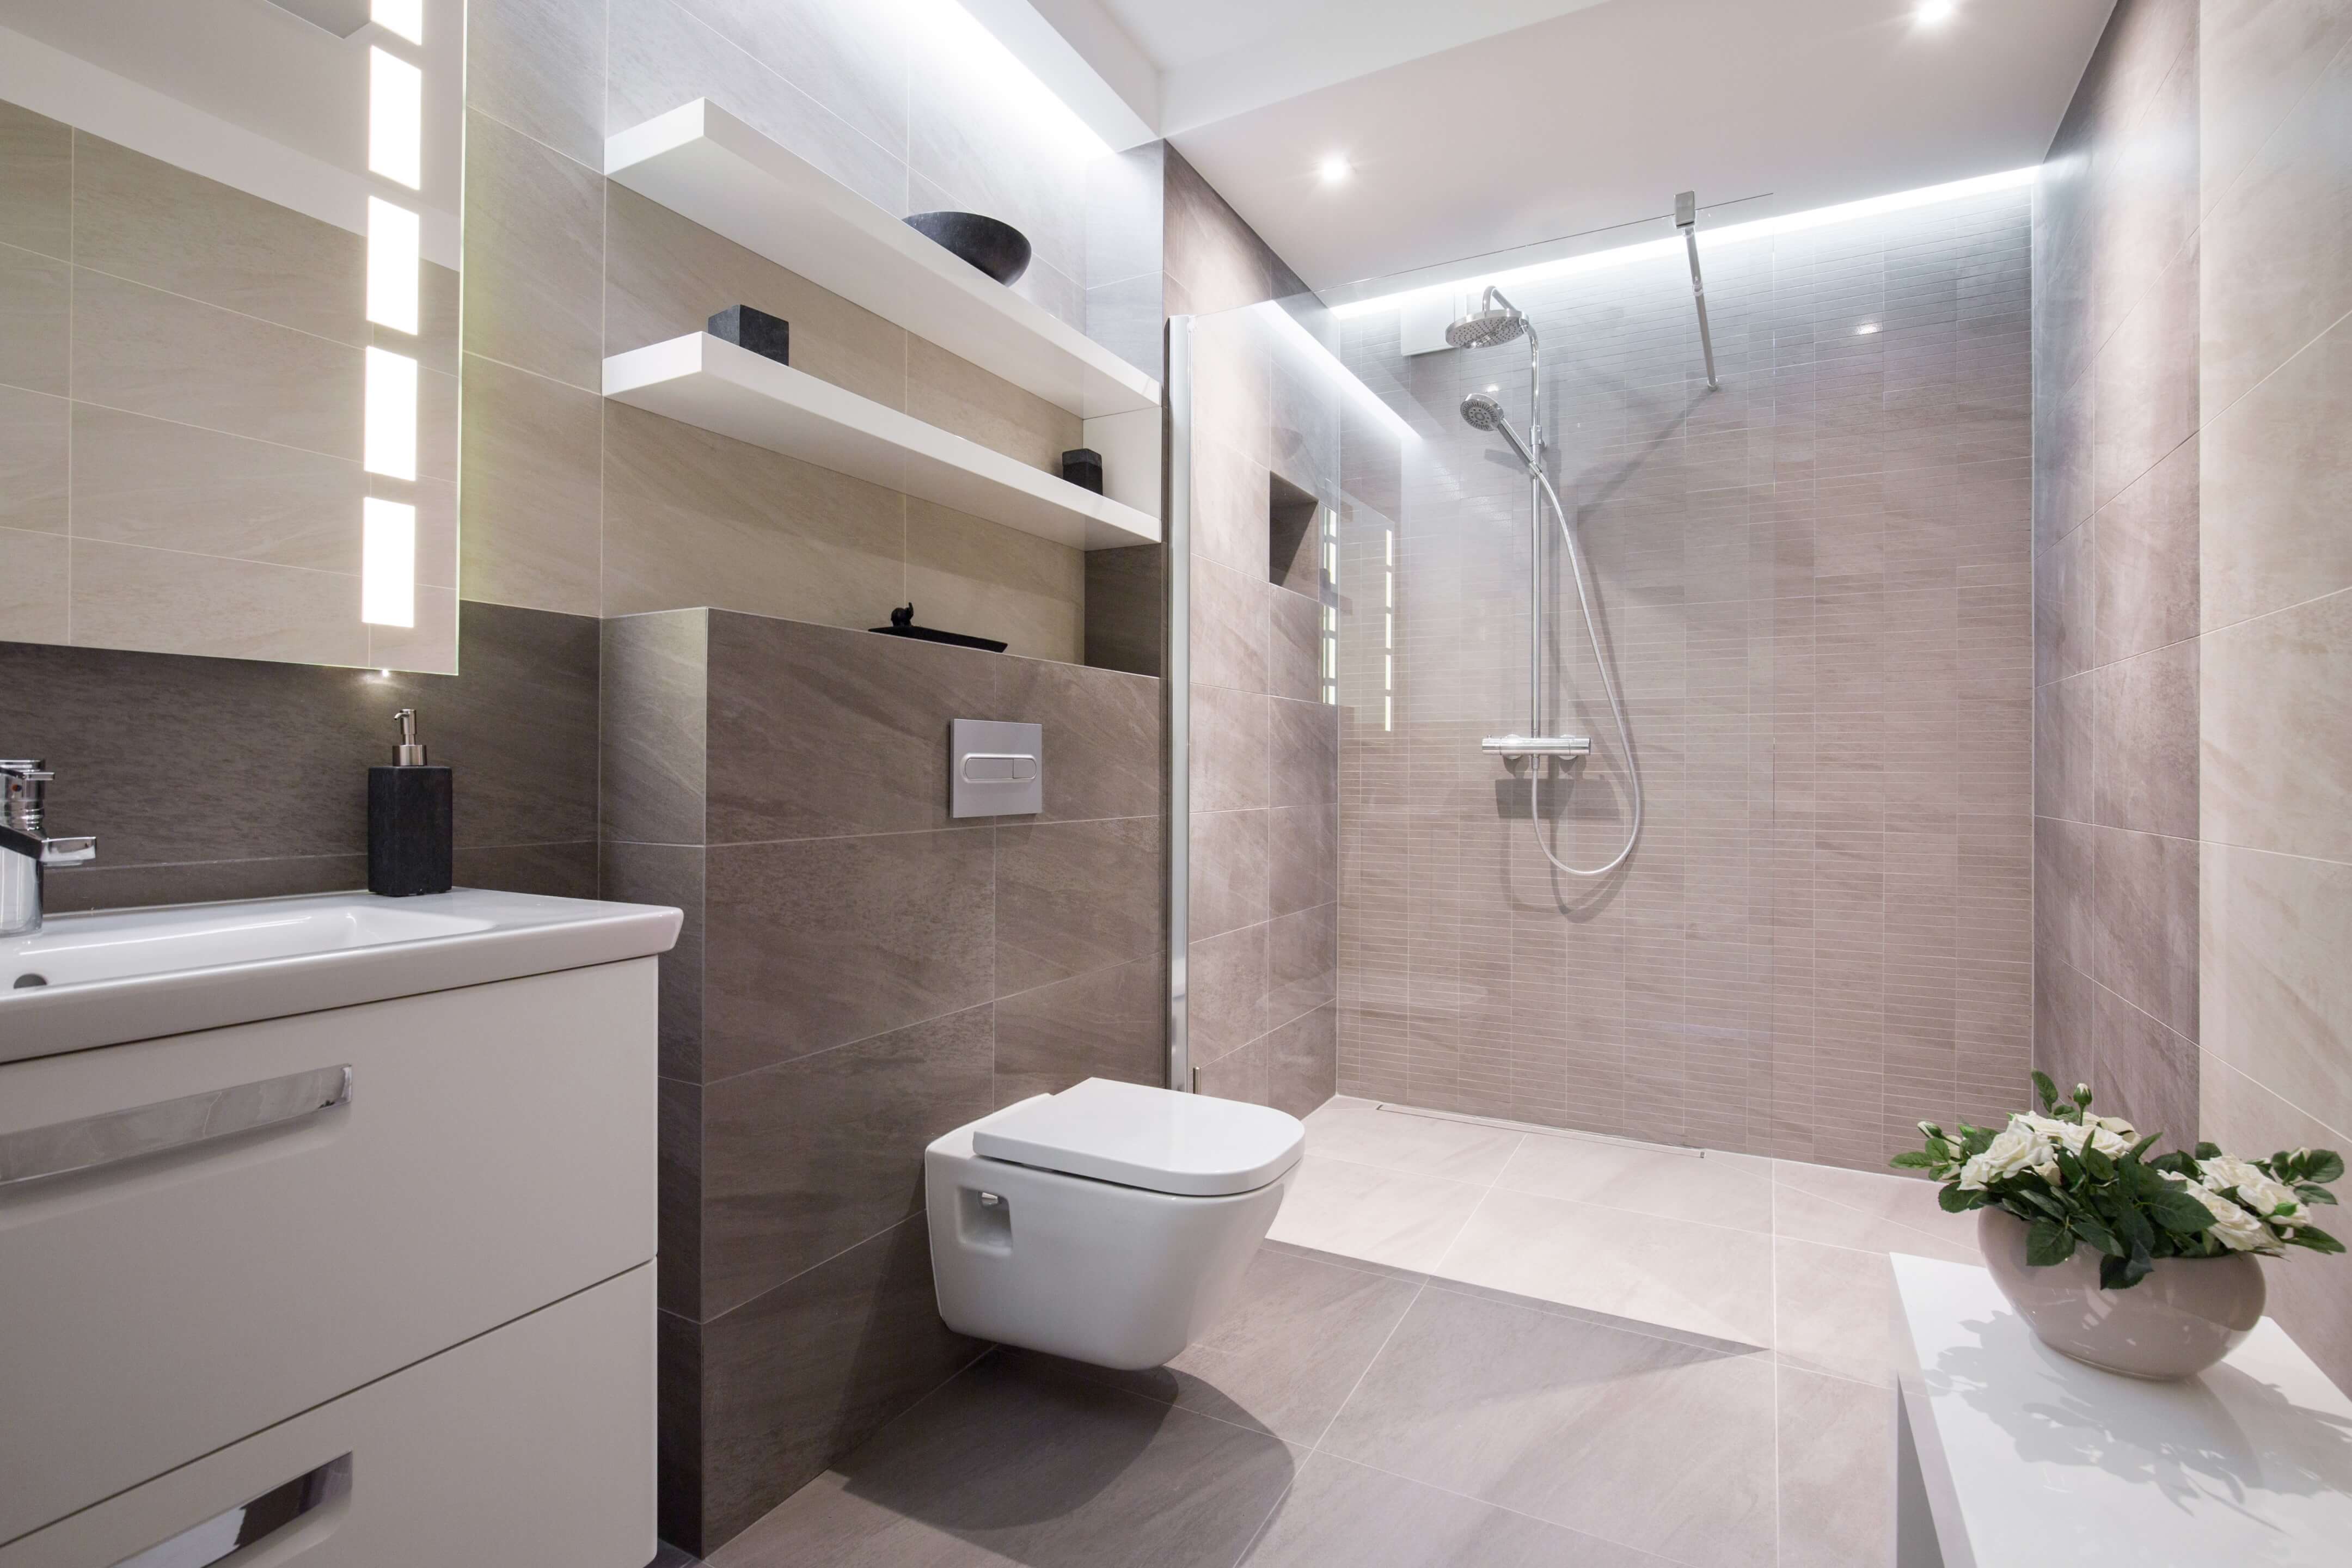 local bathroom fitters sidcup